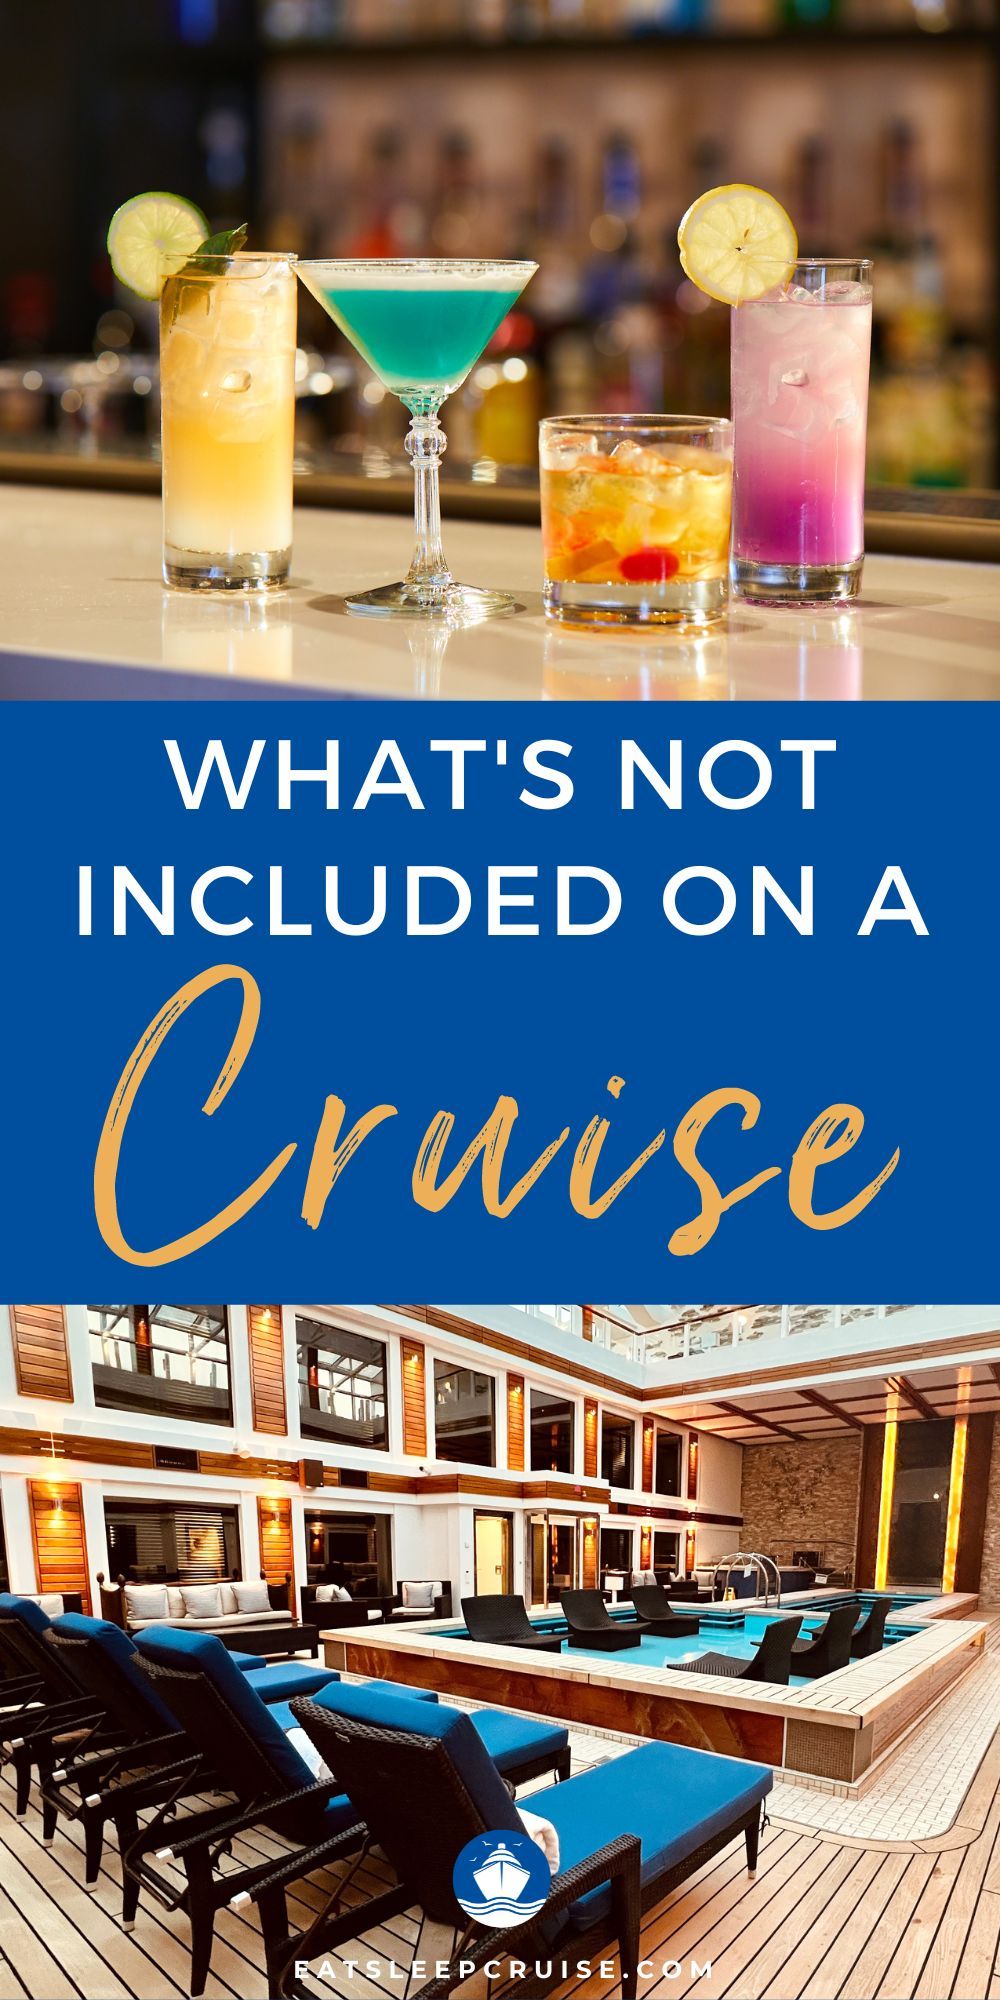 What's Not Included in the Price of a Cruise